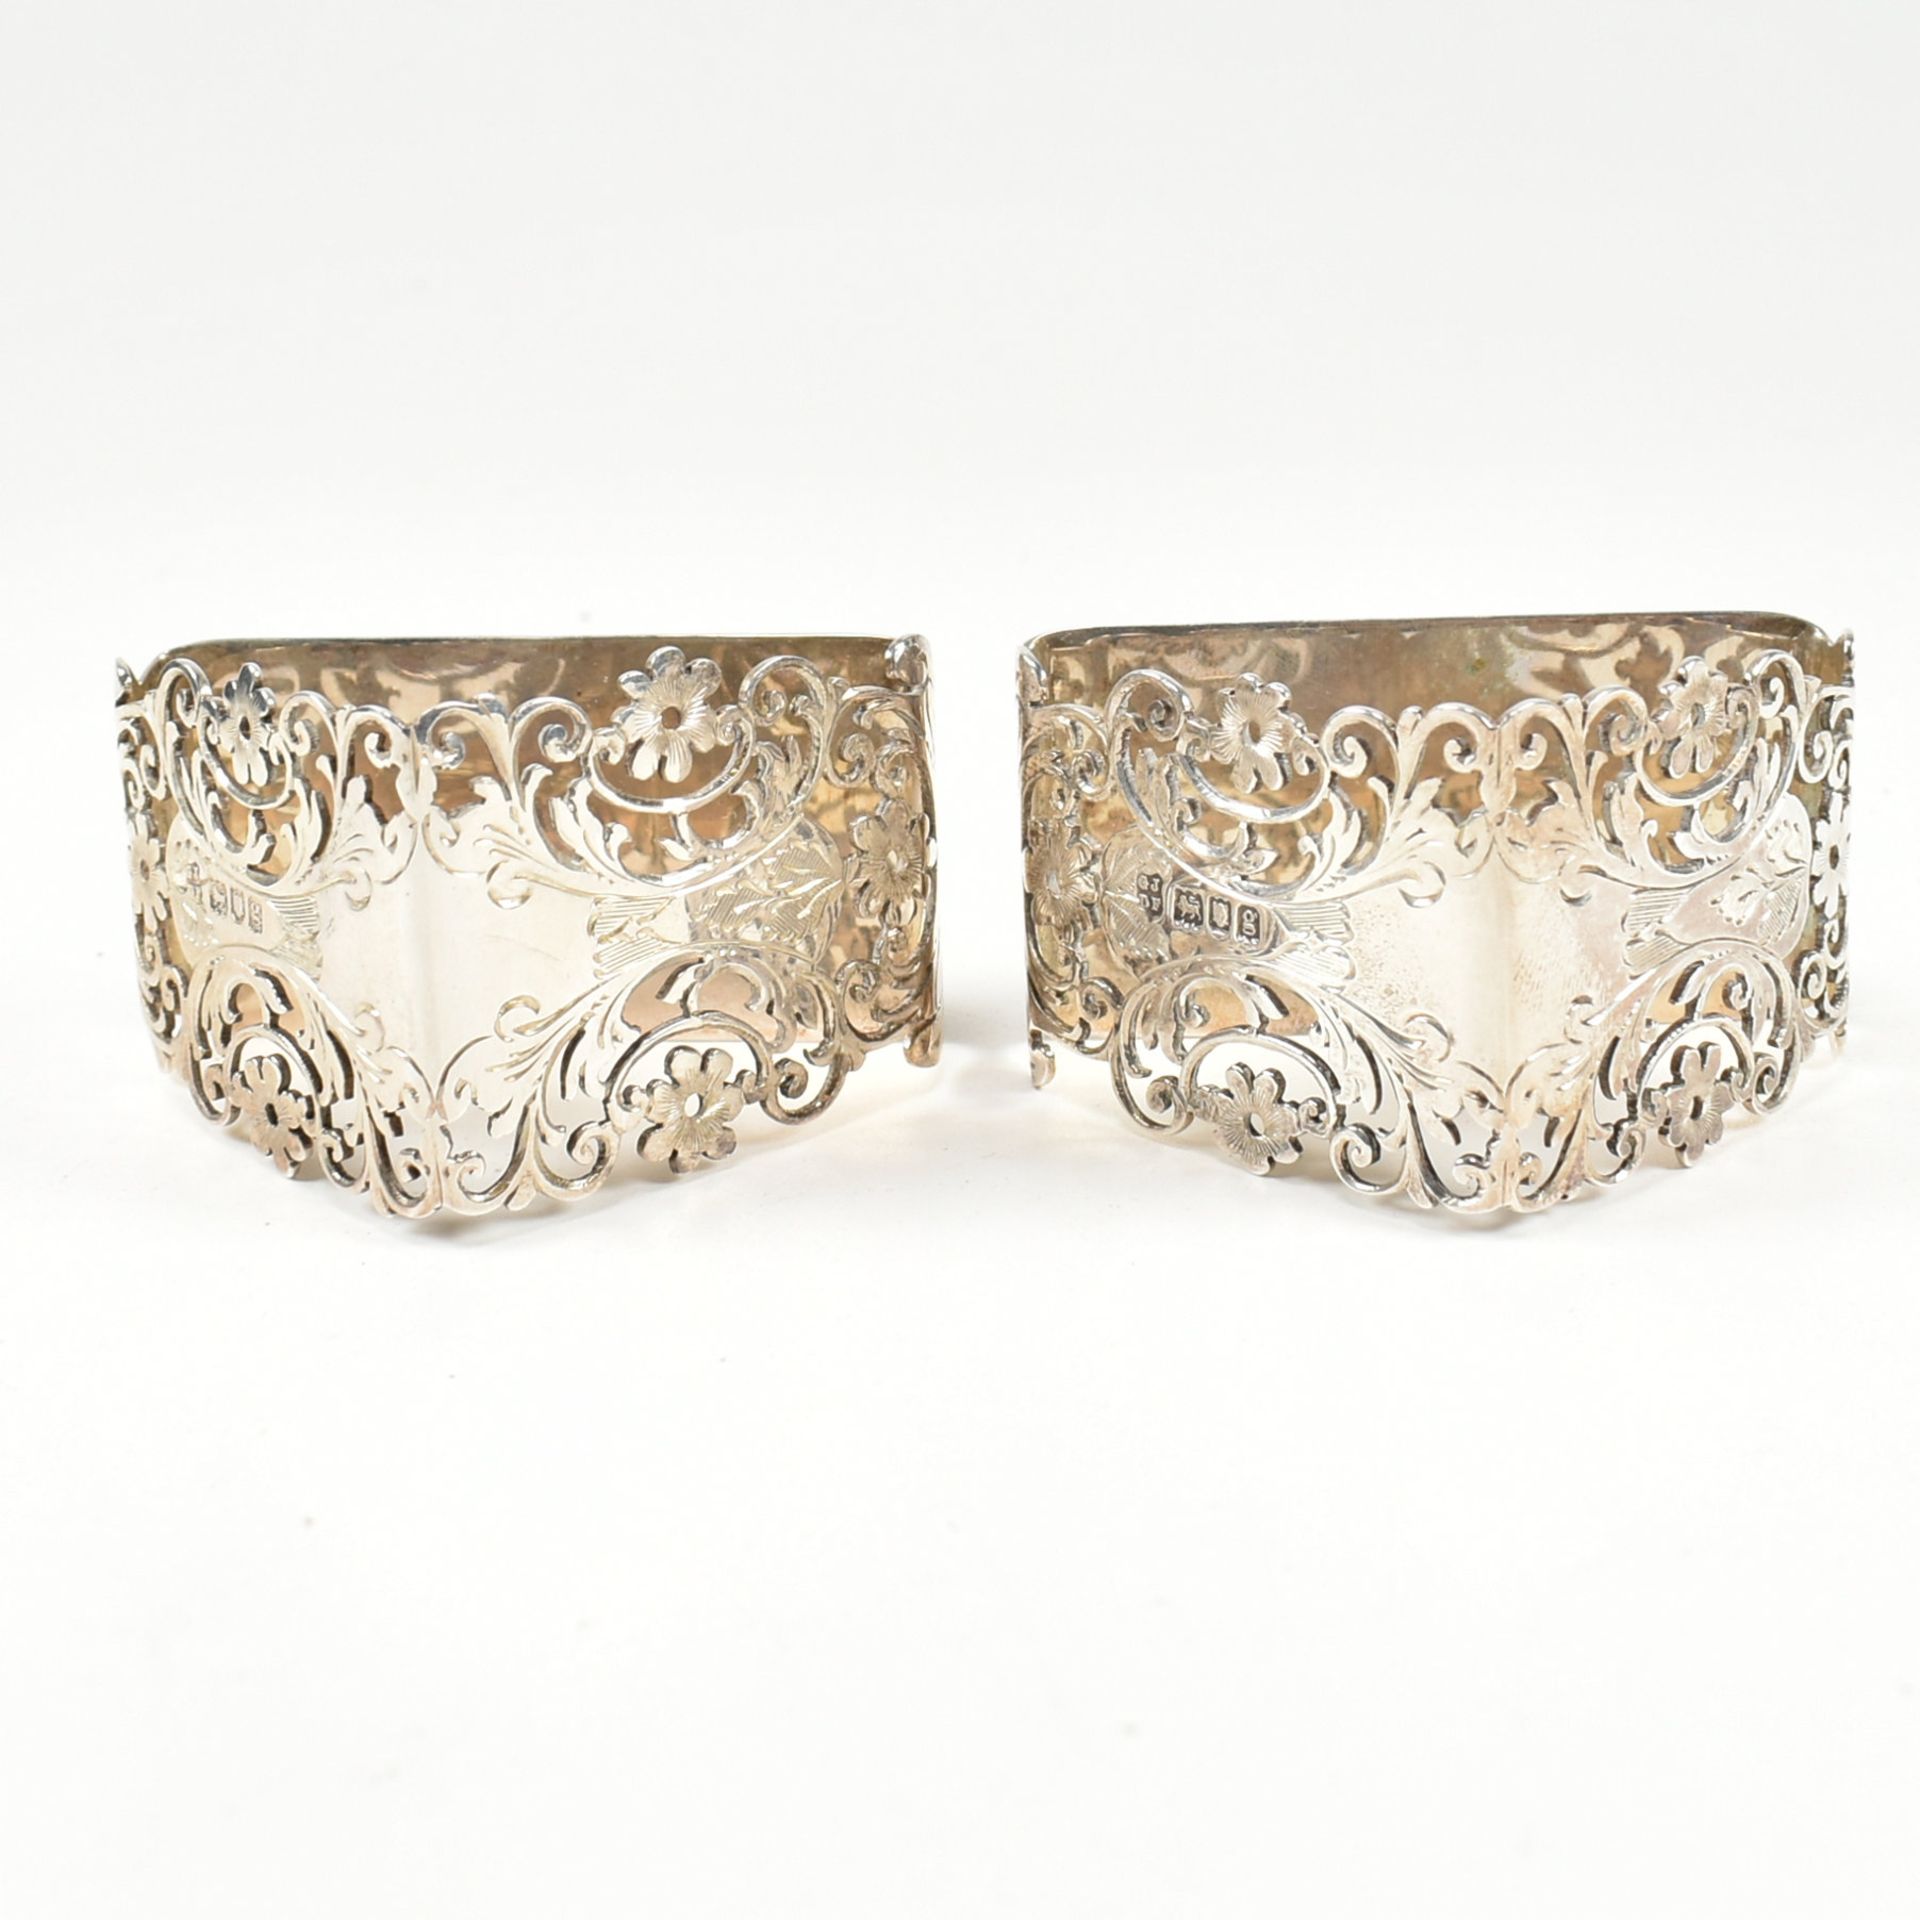 EDWARD VII CASED PAIR OF HALLMARKED SILVER NAPKIN RINGS - Image 2 of 9